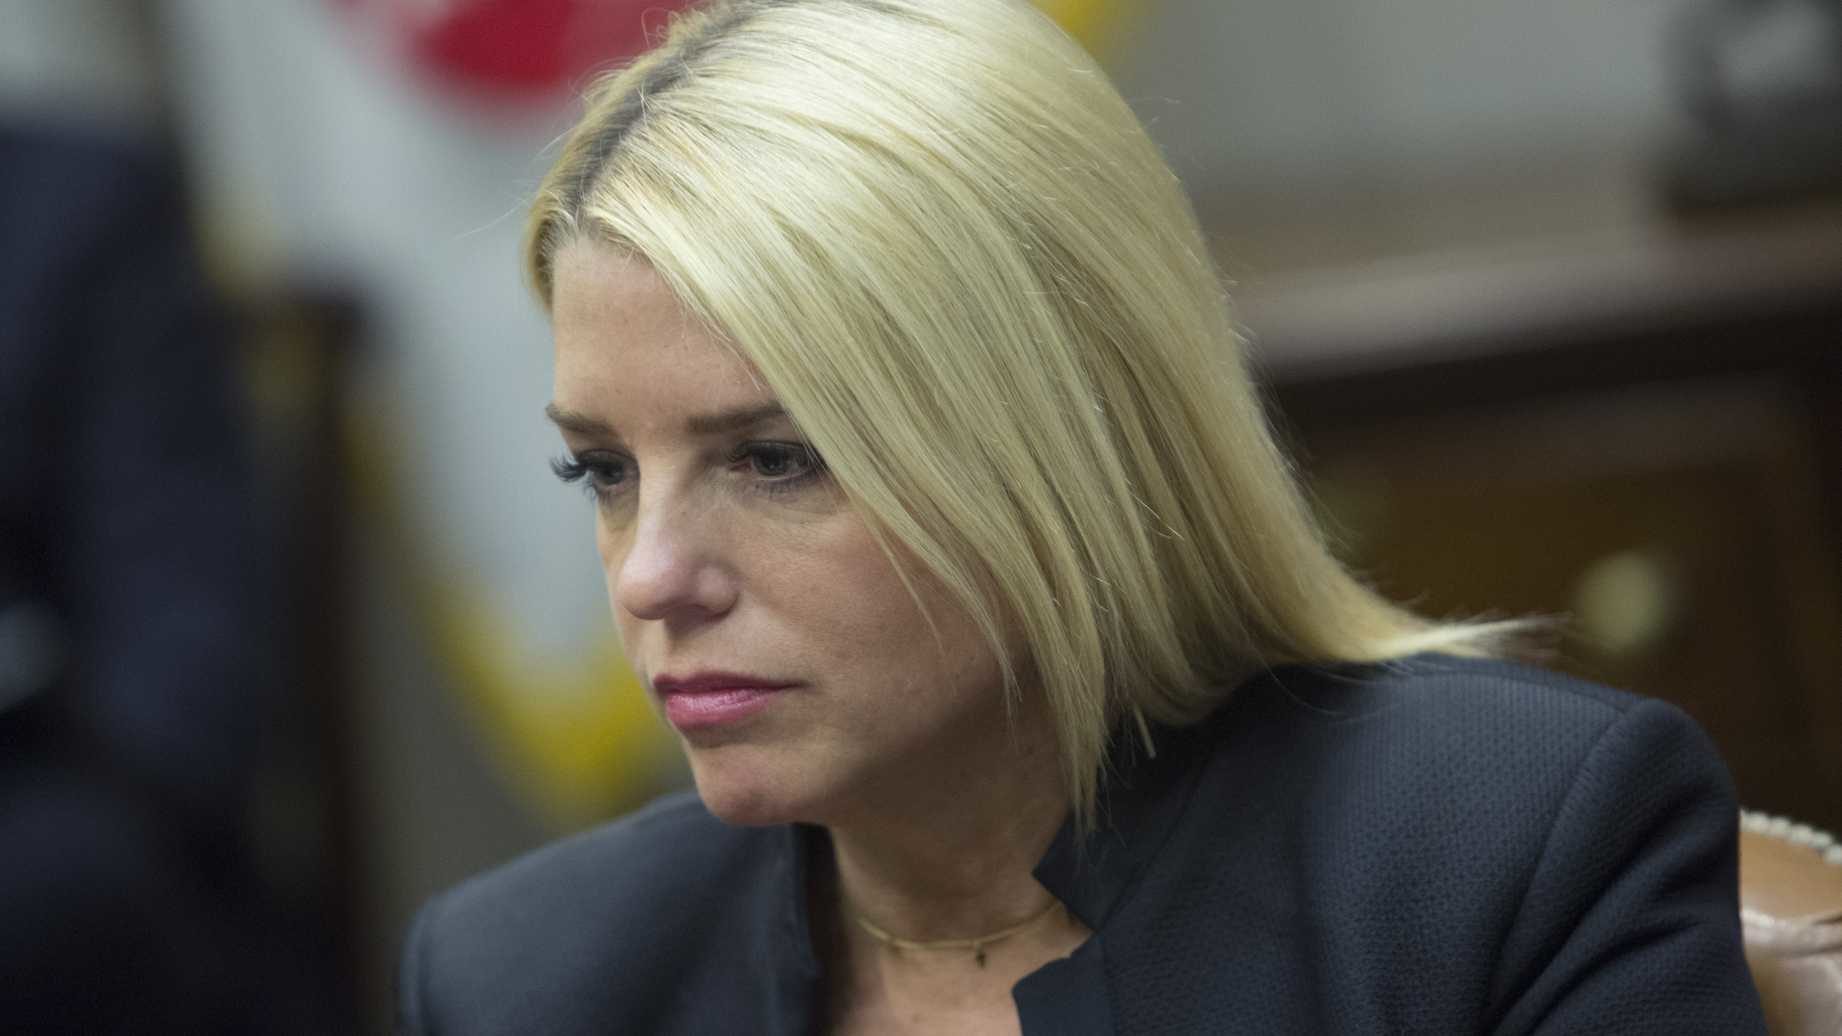 Florida AG Pam Bondi harassed by left-wing activists at a movie theater, spit on her ...1842 x 1036